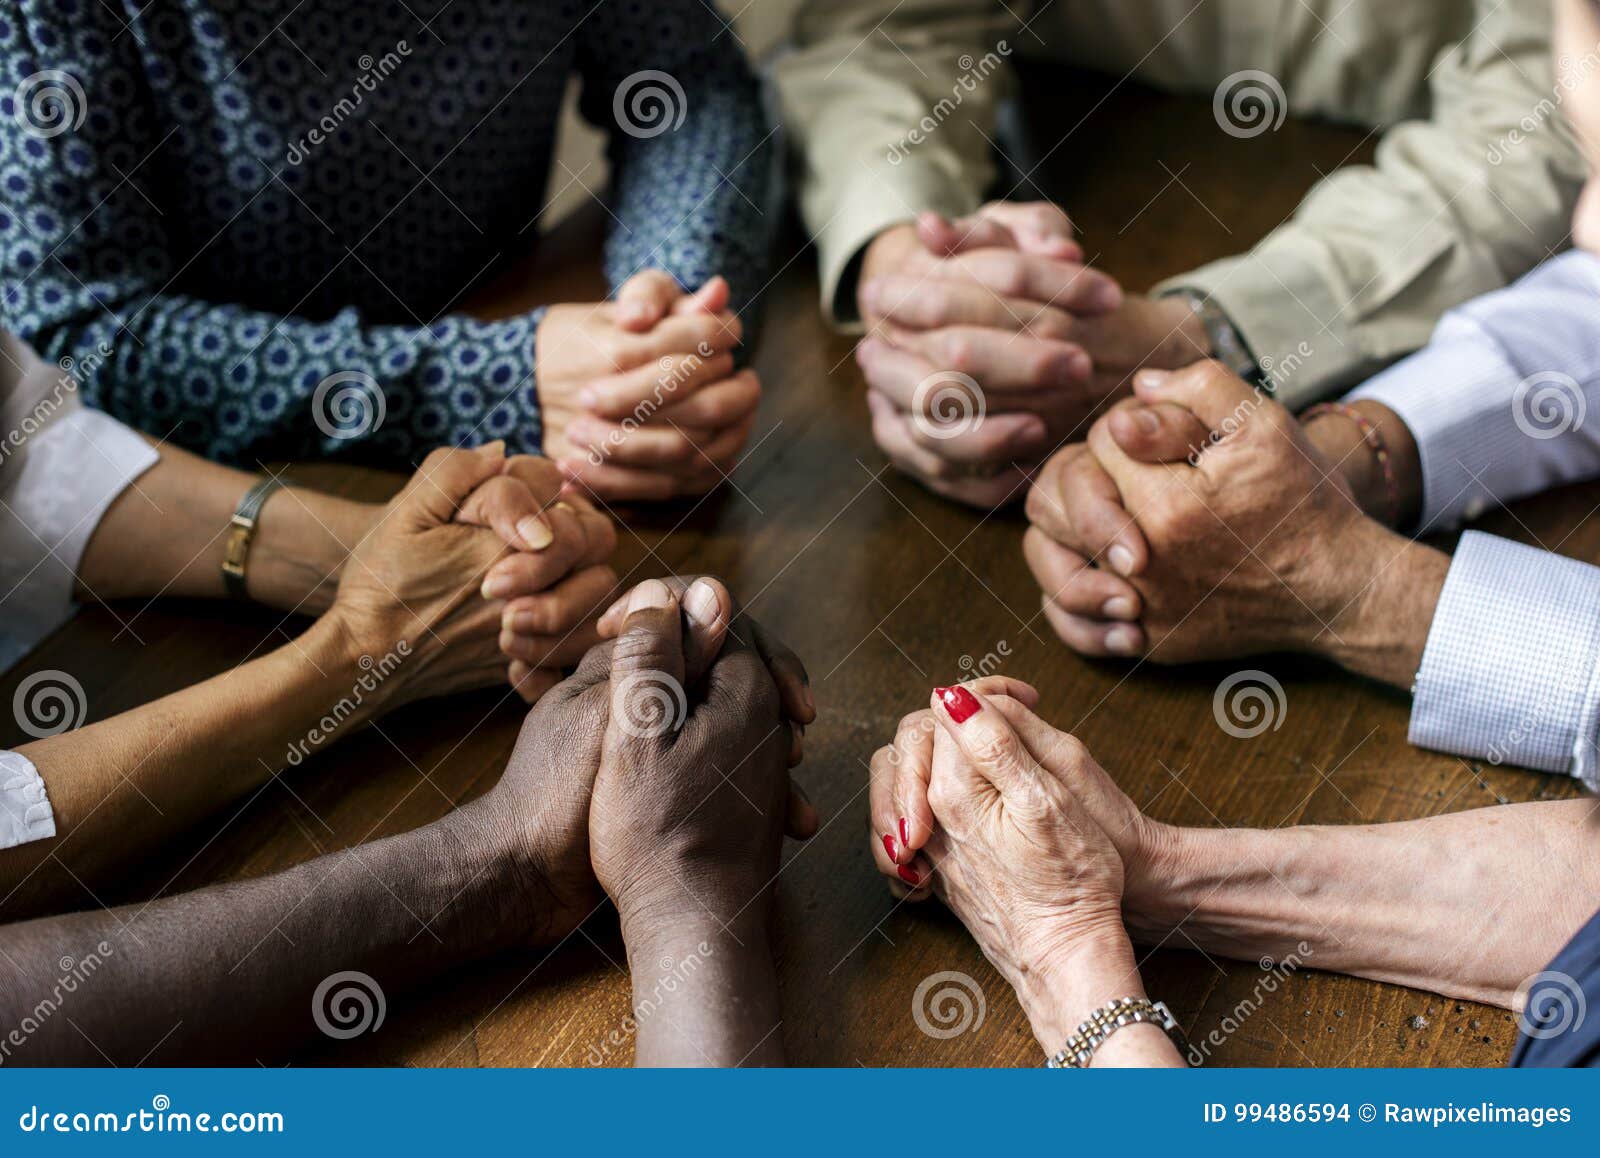 group of diverse hands are praying together